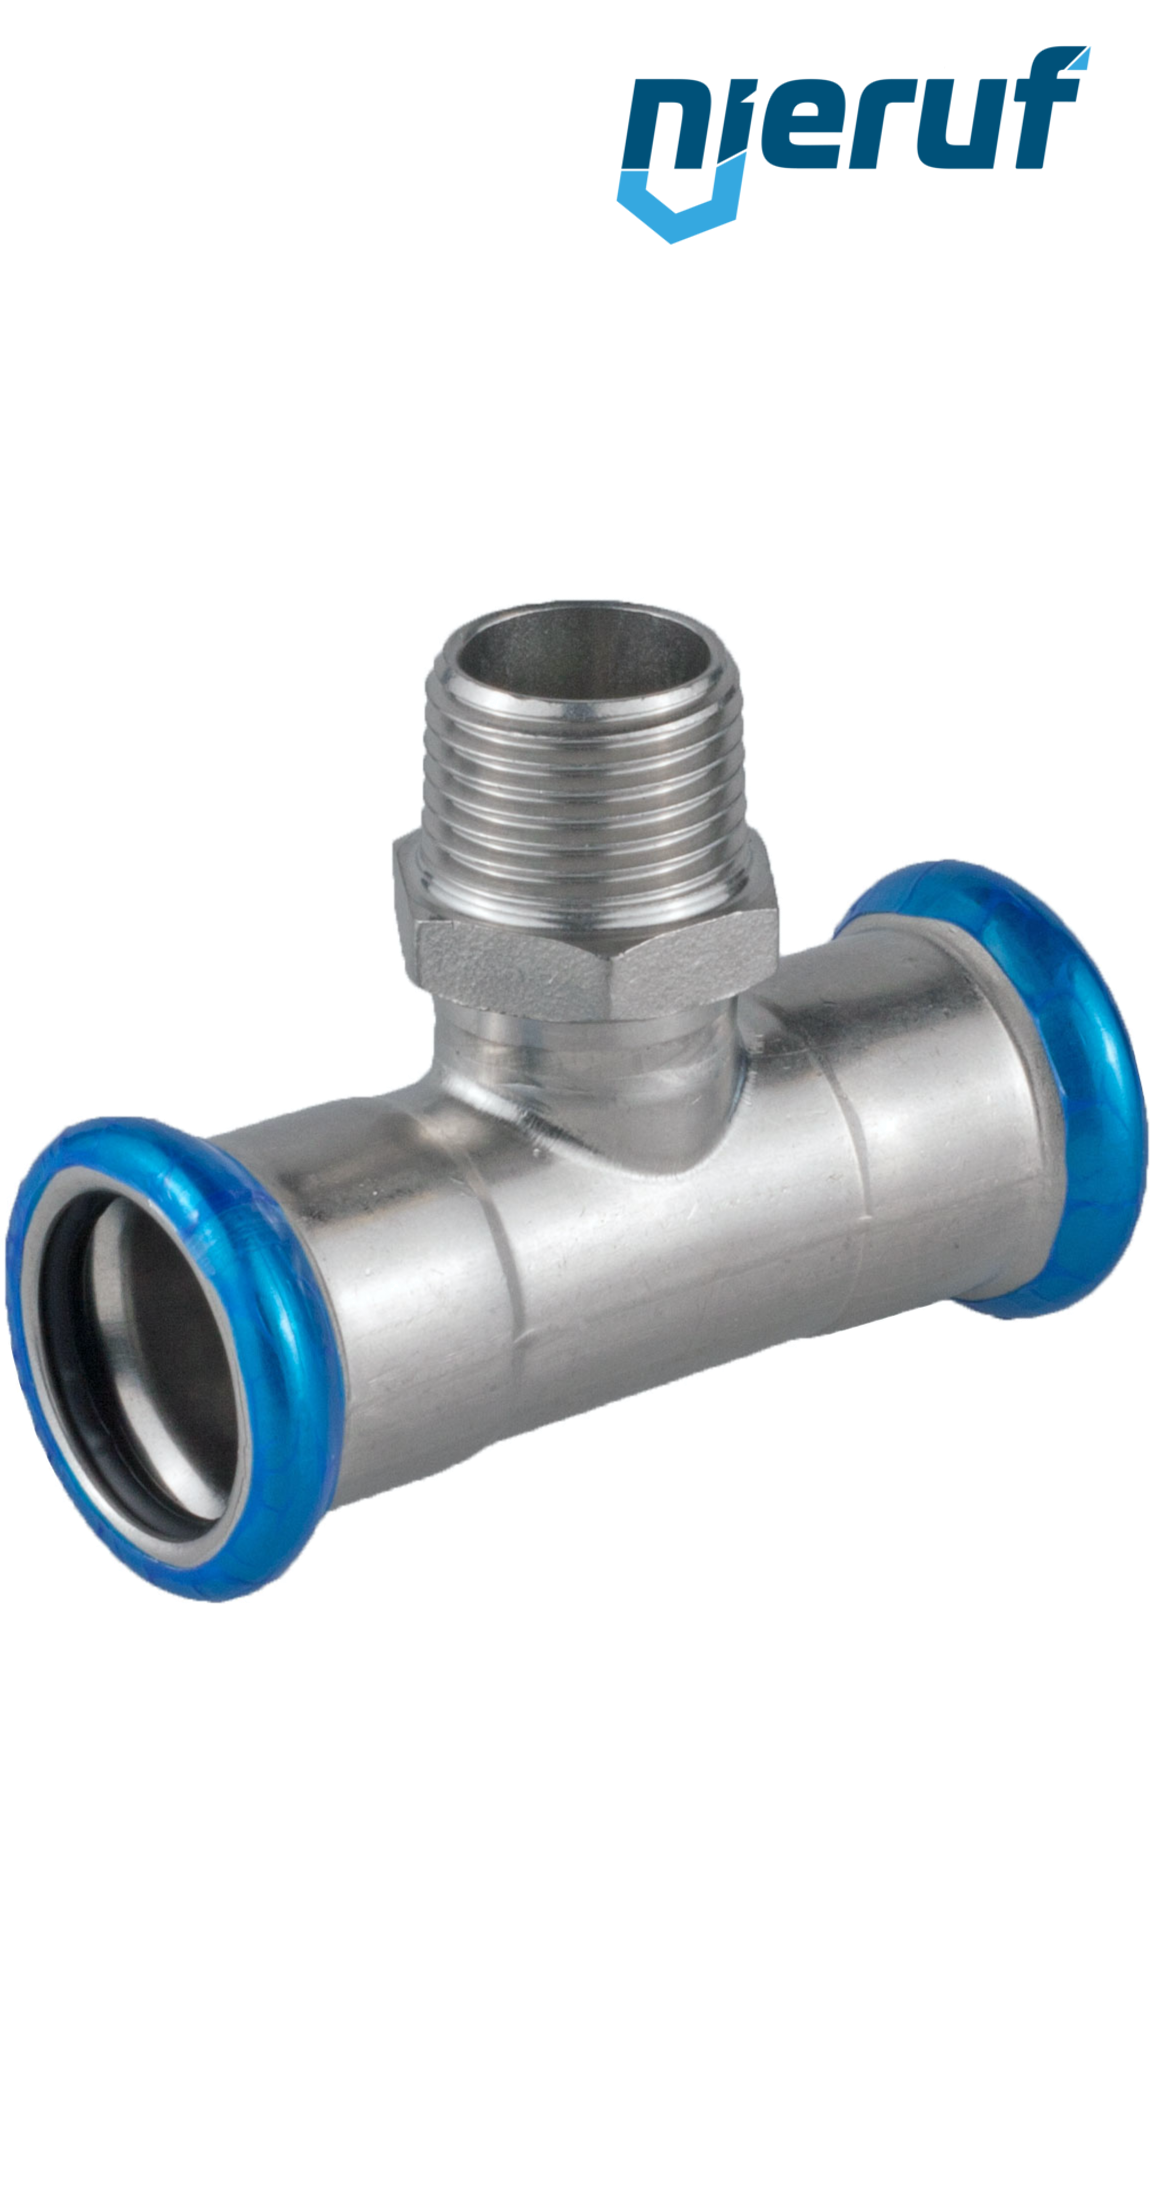 T-fitting Pressfitting F x F DN20 - 22,0 mm male thread 1/2" inch stainless steel